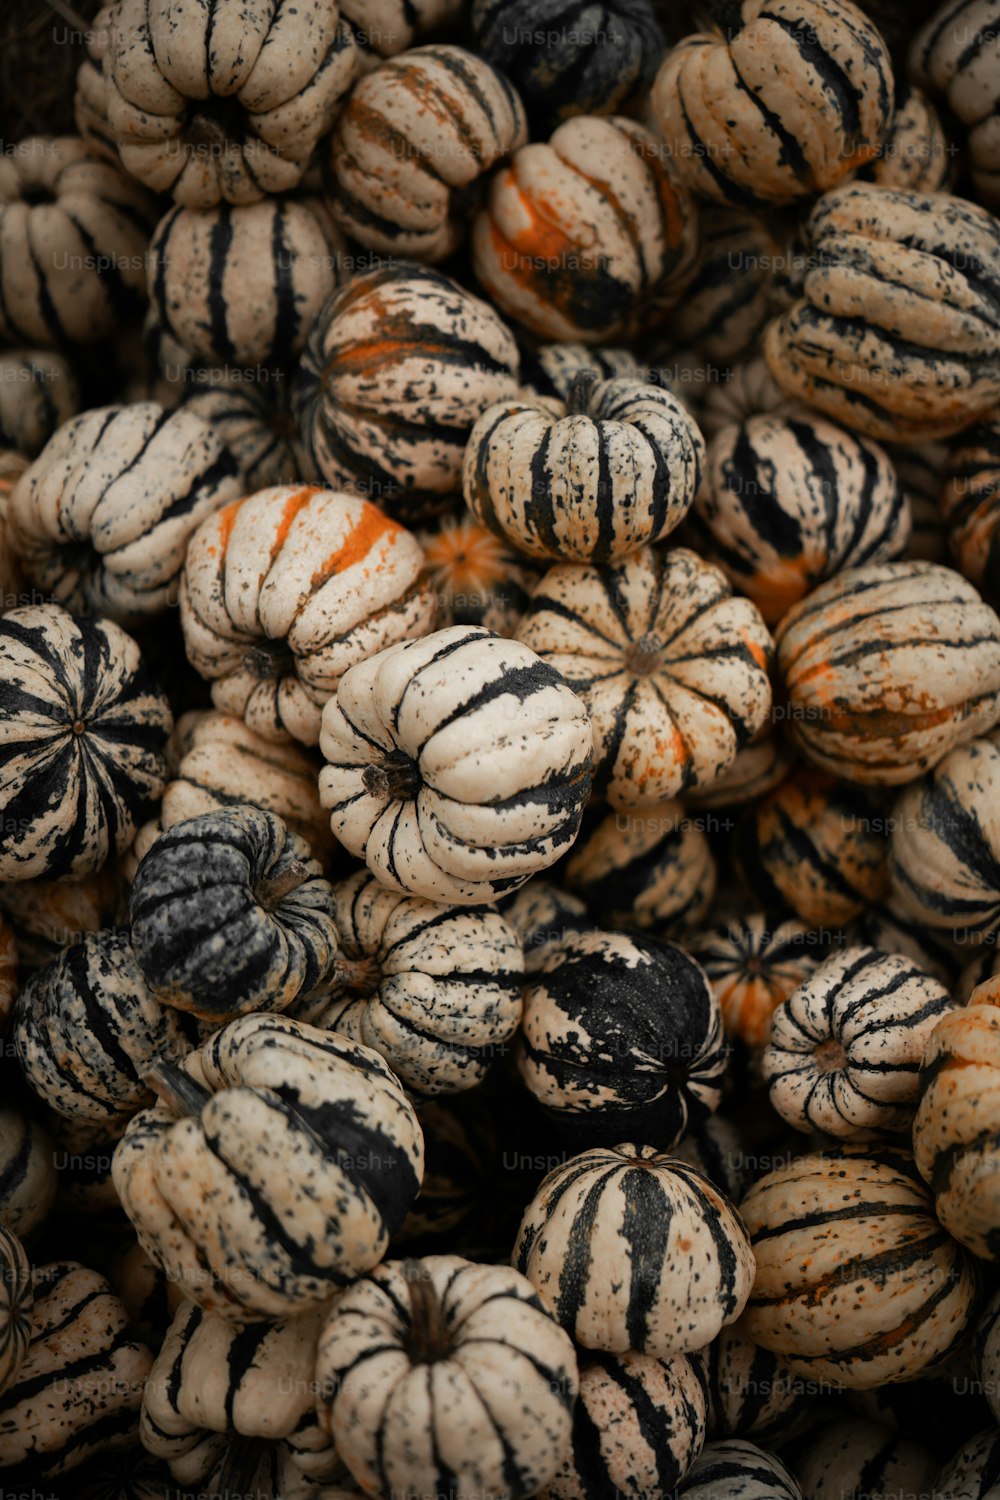 a pile of black and white striped fruit